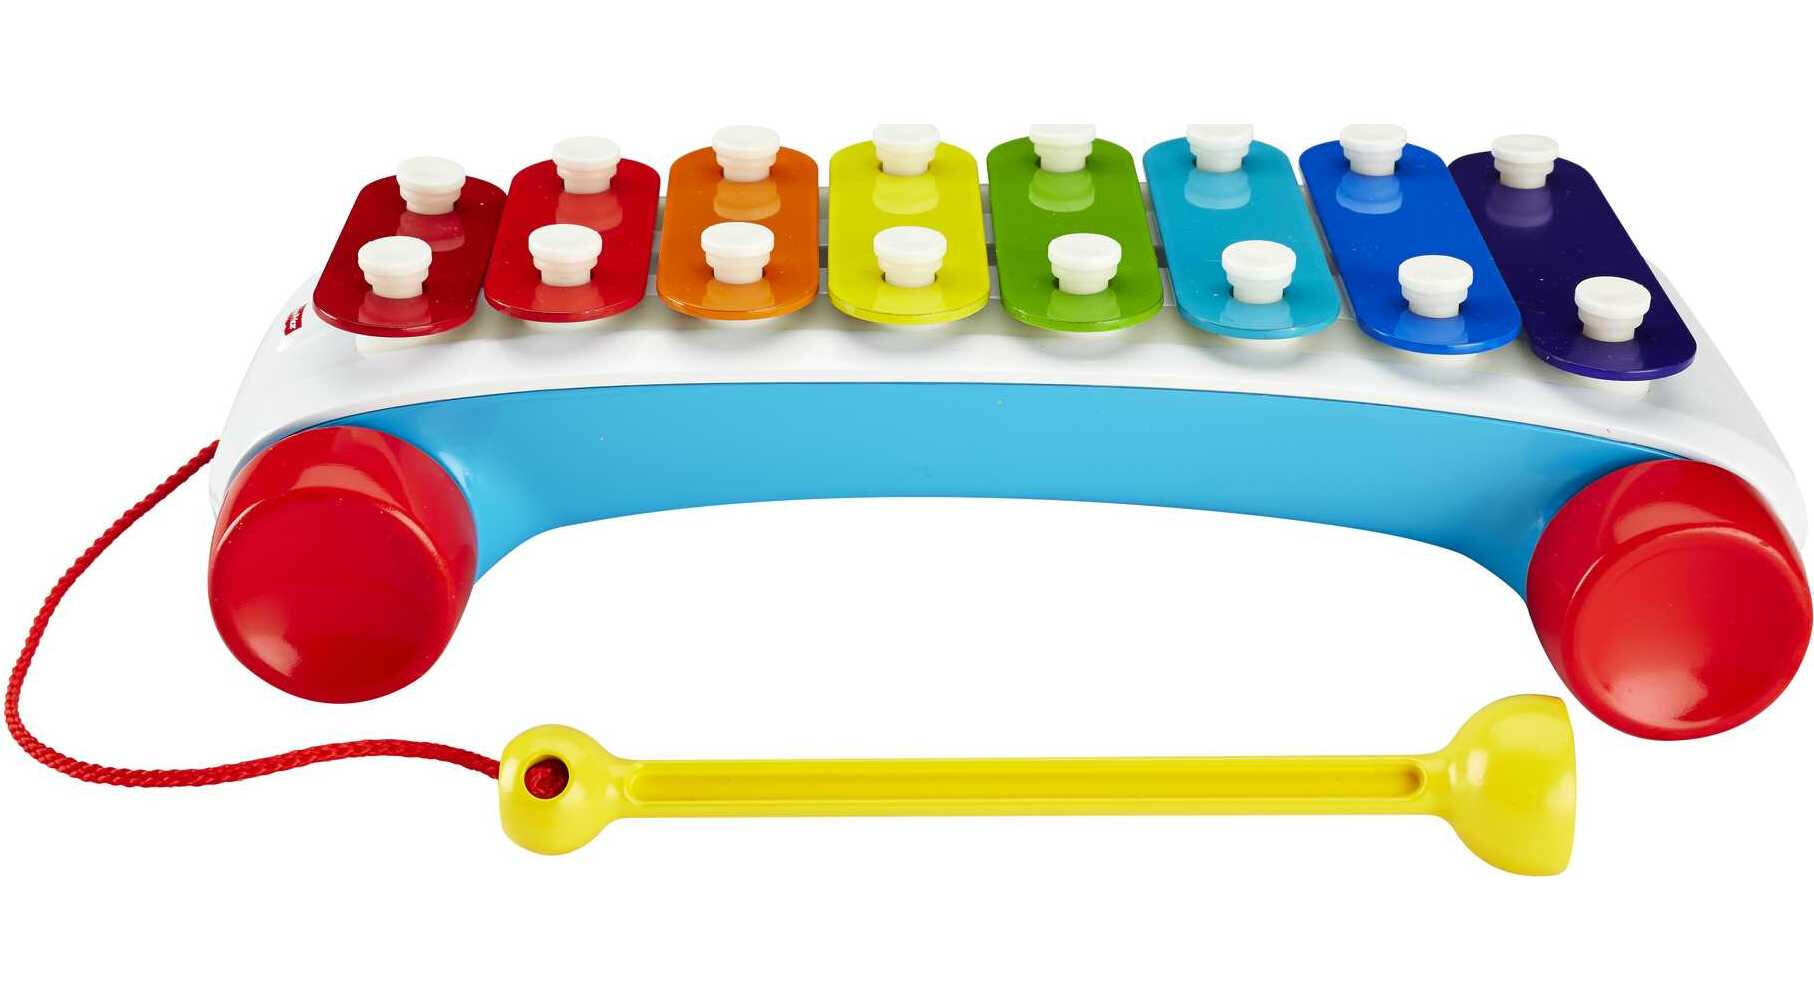 Fisher-Price Classic Xylophone Toddler Pretend Musical Instrument Pull Toy - image 3 of 6